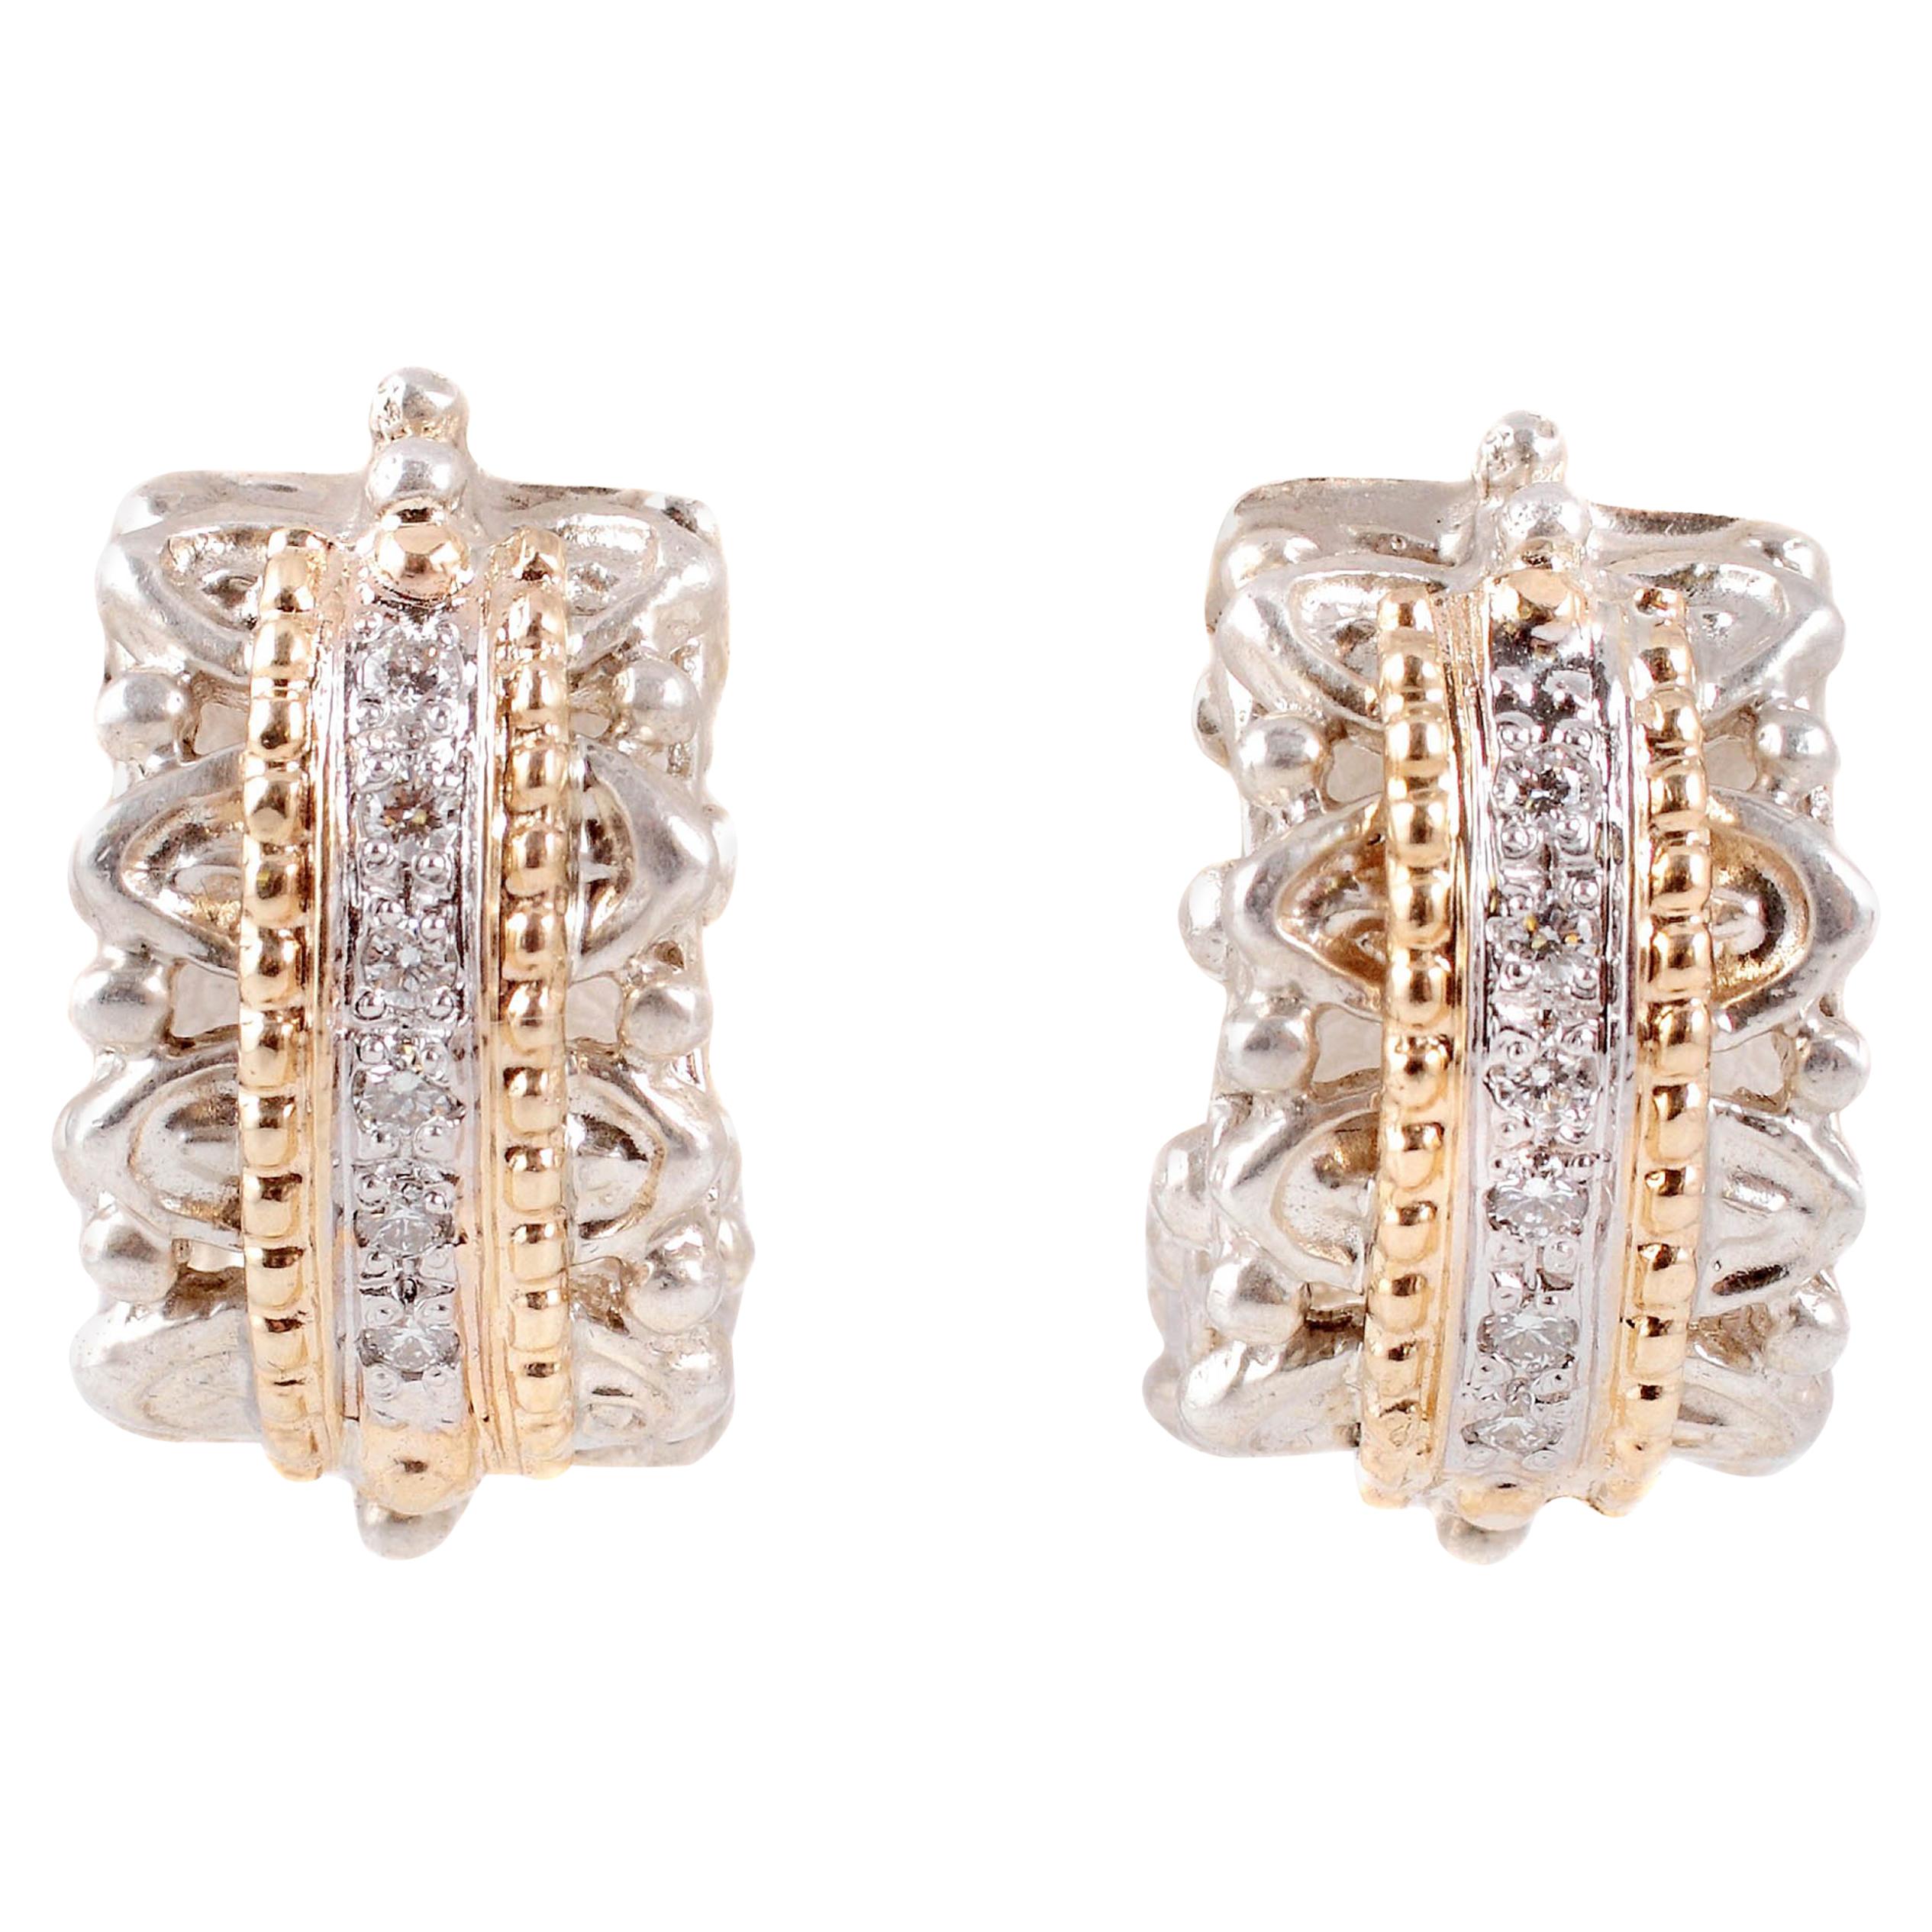 Yellow Gold Sterling Silver Diamond Earrings by "Alwand Vahan"